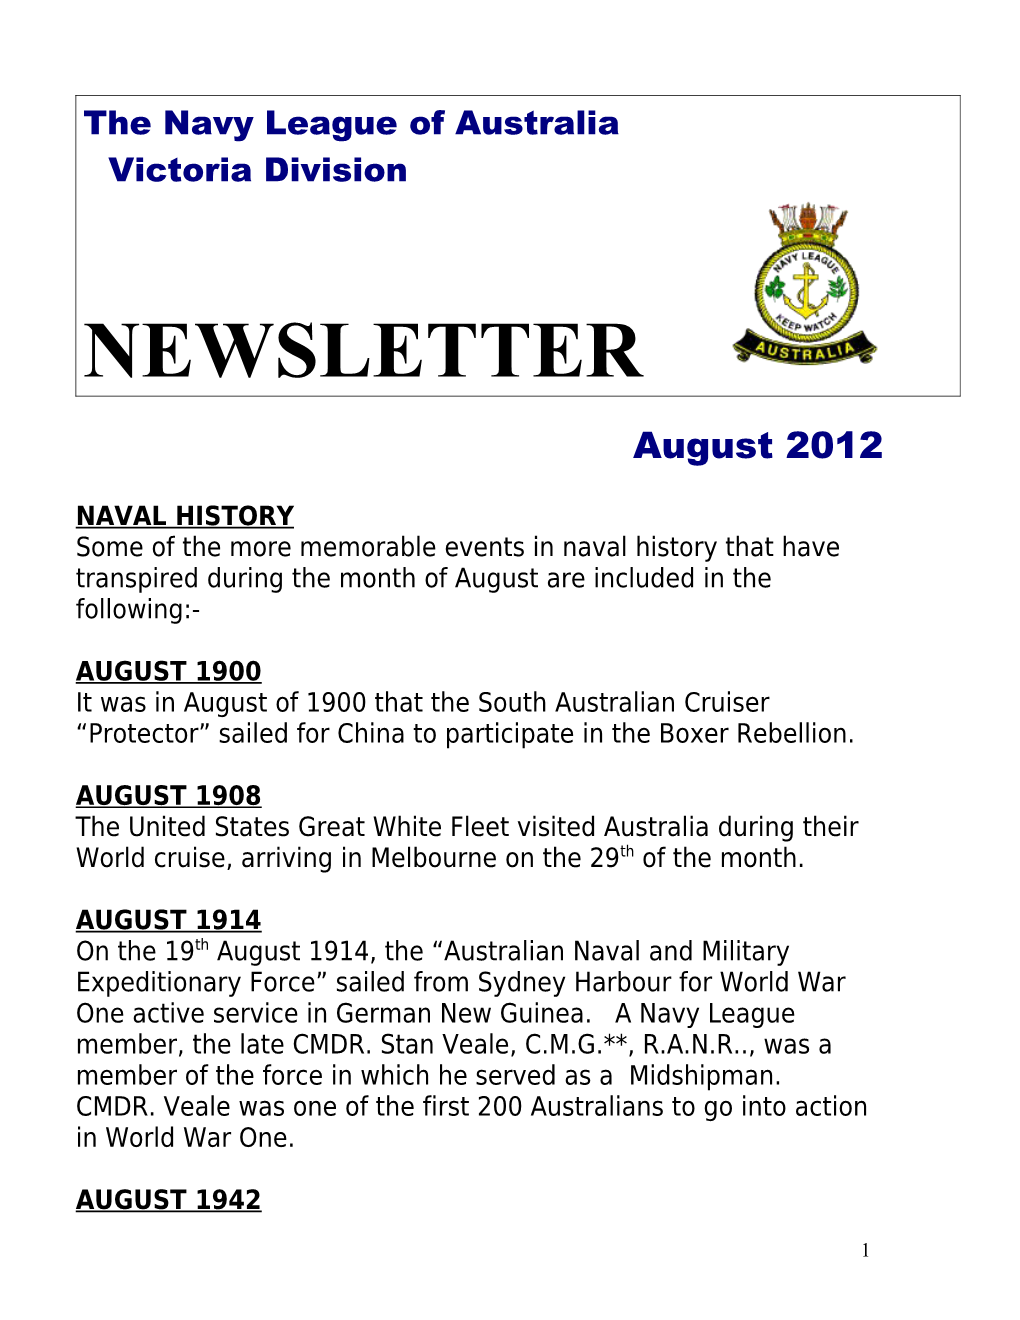 In the Months of January and February 2001 a Number of Australian and American Naval Ships